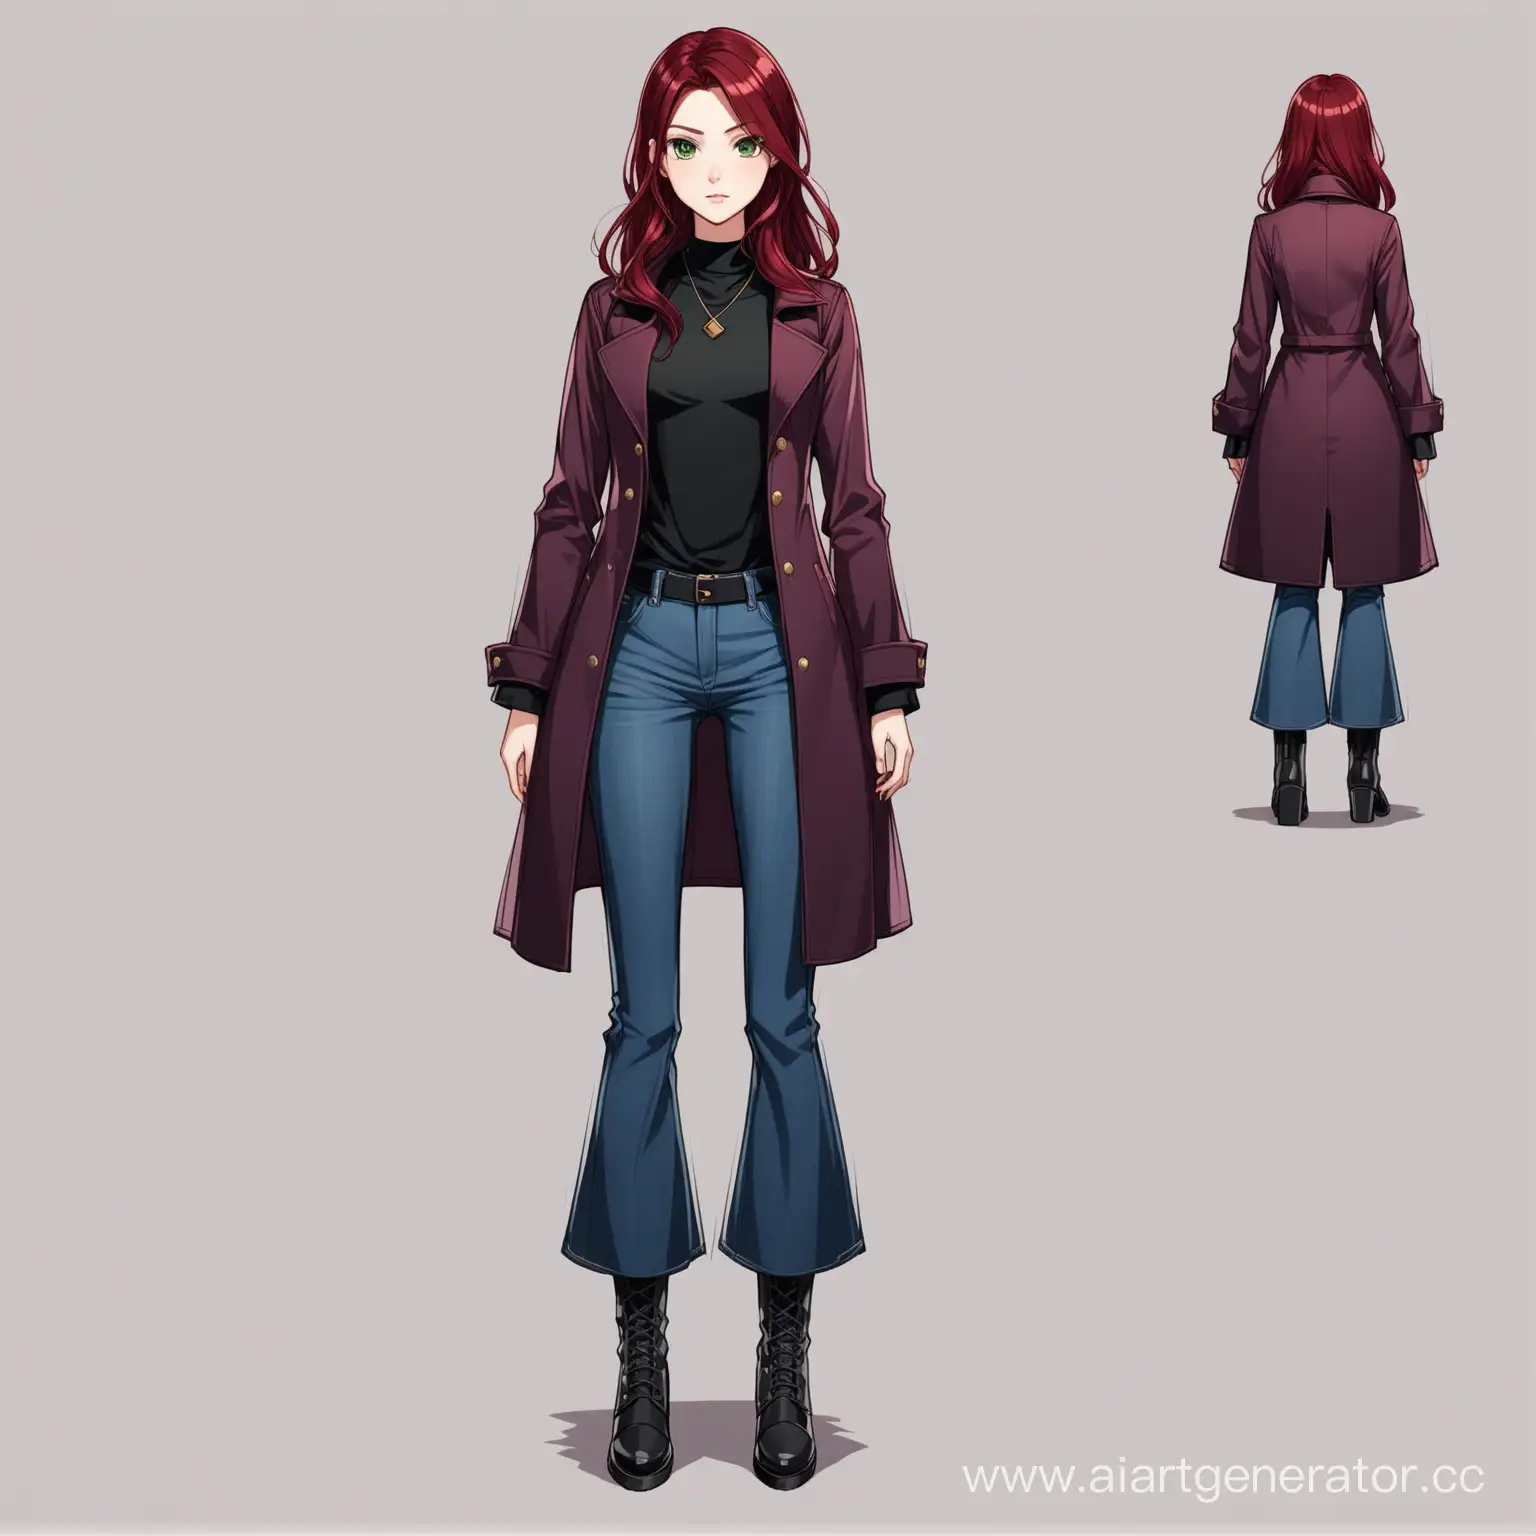 A girl with dark red hair of medium length, she has dark green natural eyes and is wearing a black polo shirt, a long purple coat, wide bell-bottom jeans and black boots, she stands tall, original character design, detailed design, character.